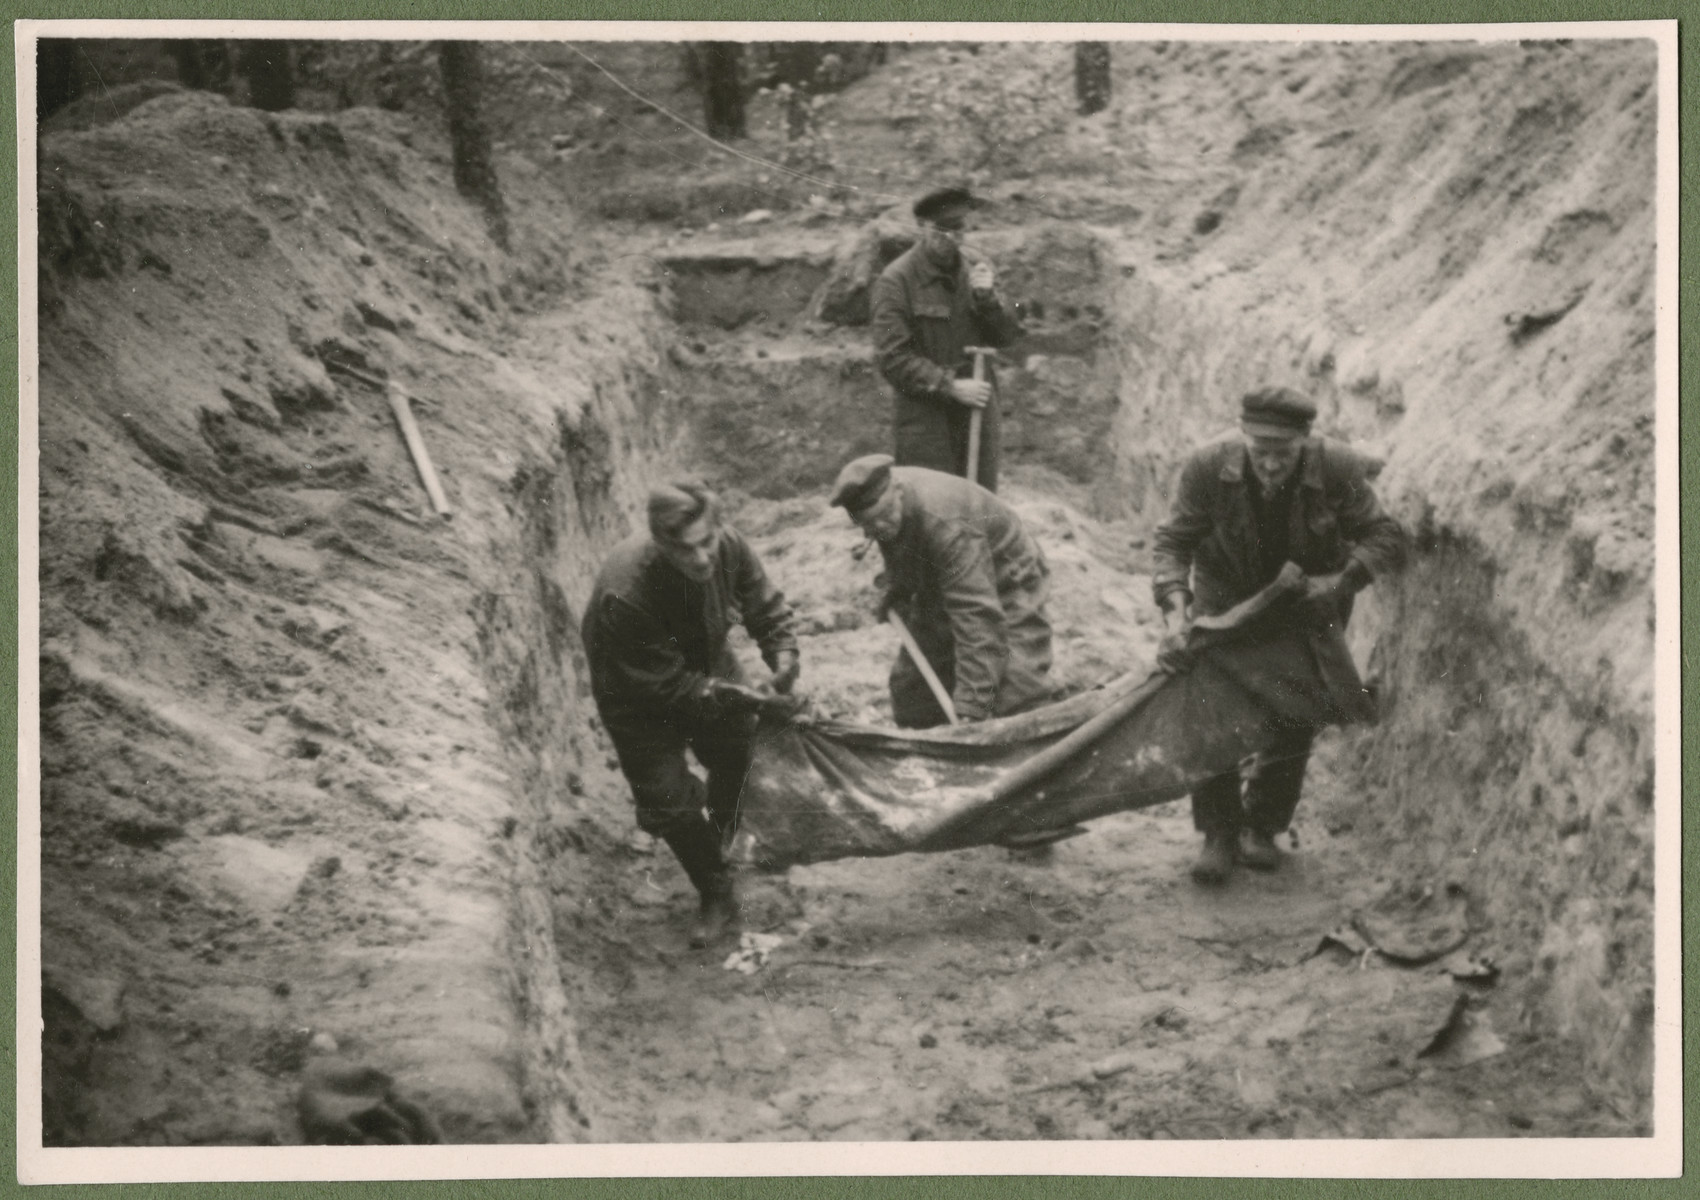 Under the supervision of British troops, German civilians and Nazi officials exhume the corpses of 243 slave laborers for proper reburial.  The victims were shot by their guards on the railway lines at Lueneburg on the way to the Belsen Camp.